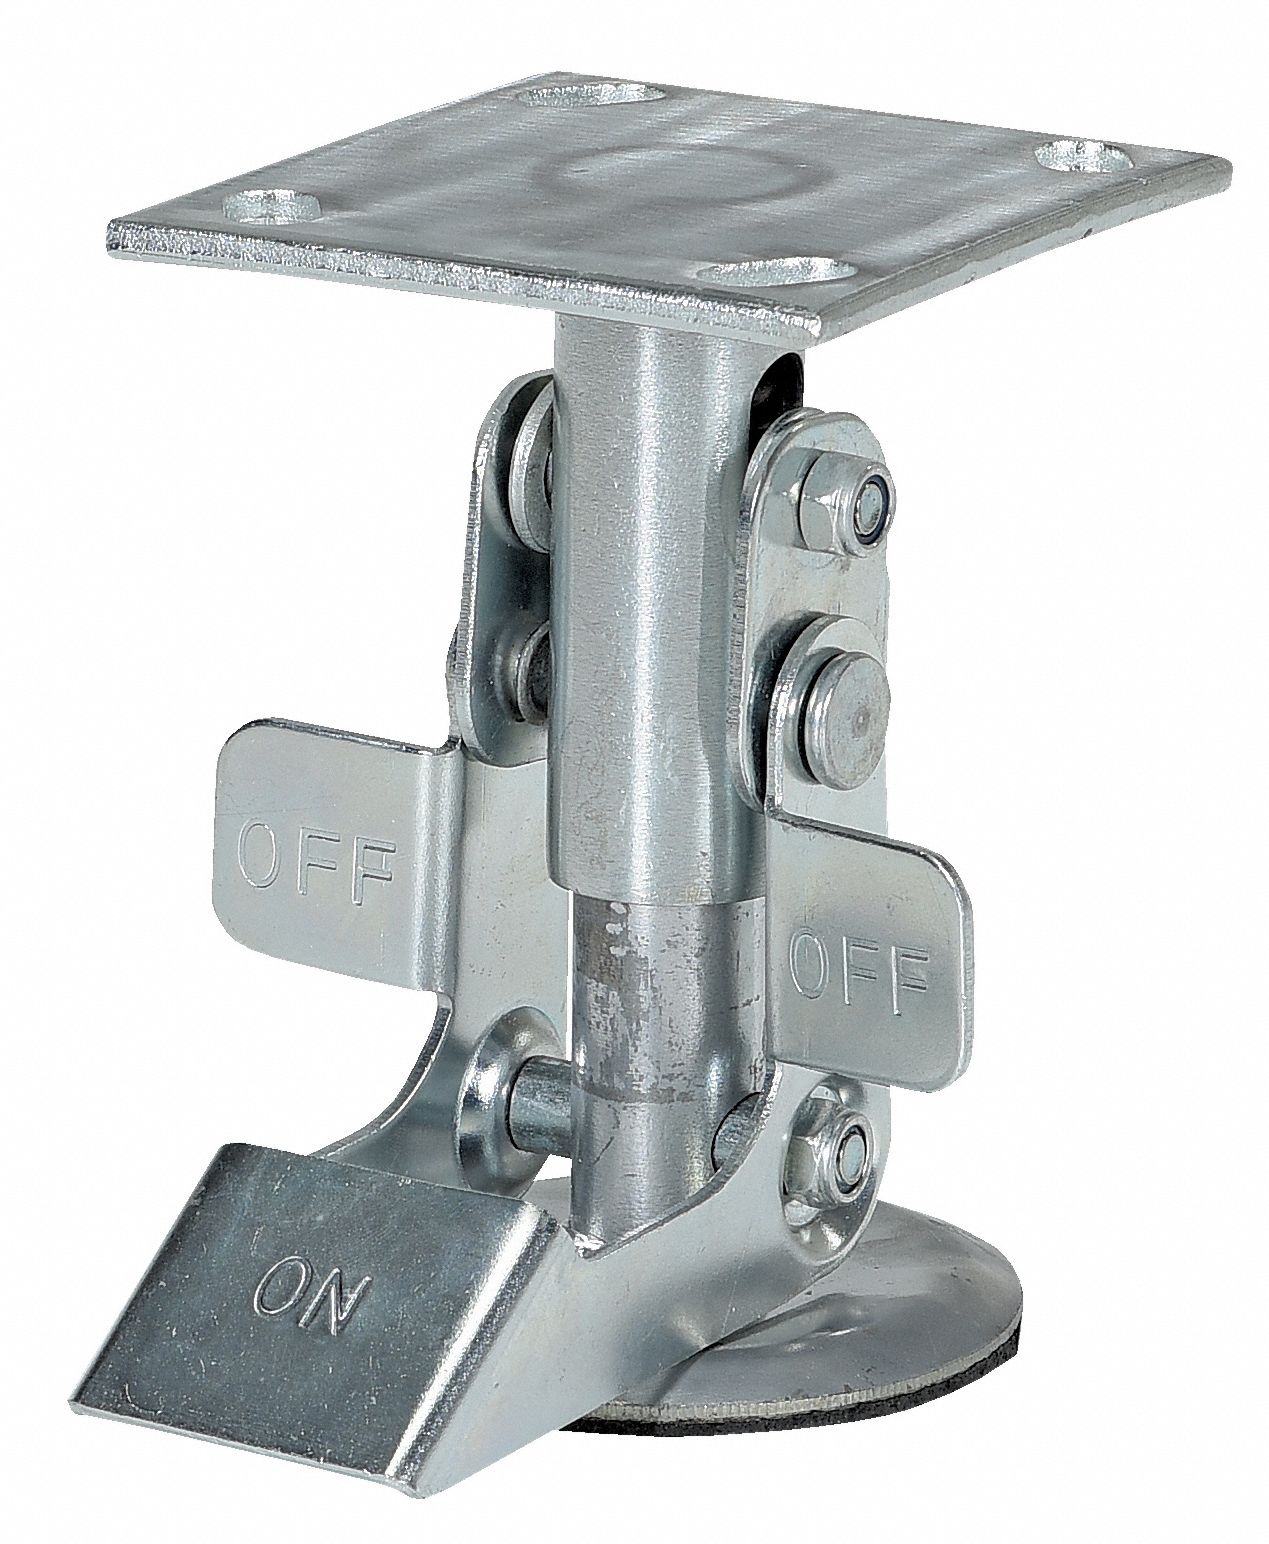 3 5/8 in to 4 1/4 in fit Caster Mounting Height,2041004306 Steel,Abrasion-Resistant Nonmarking Floor Lock 